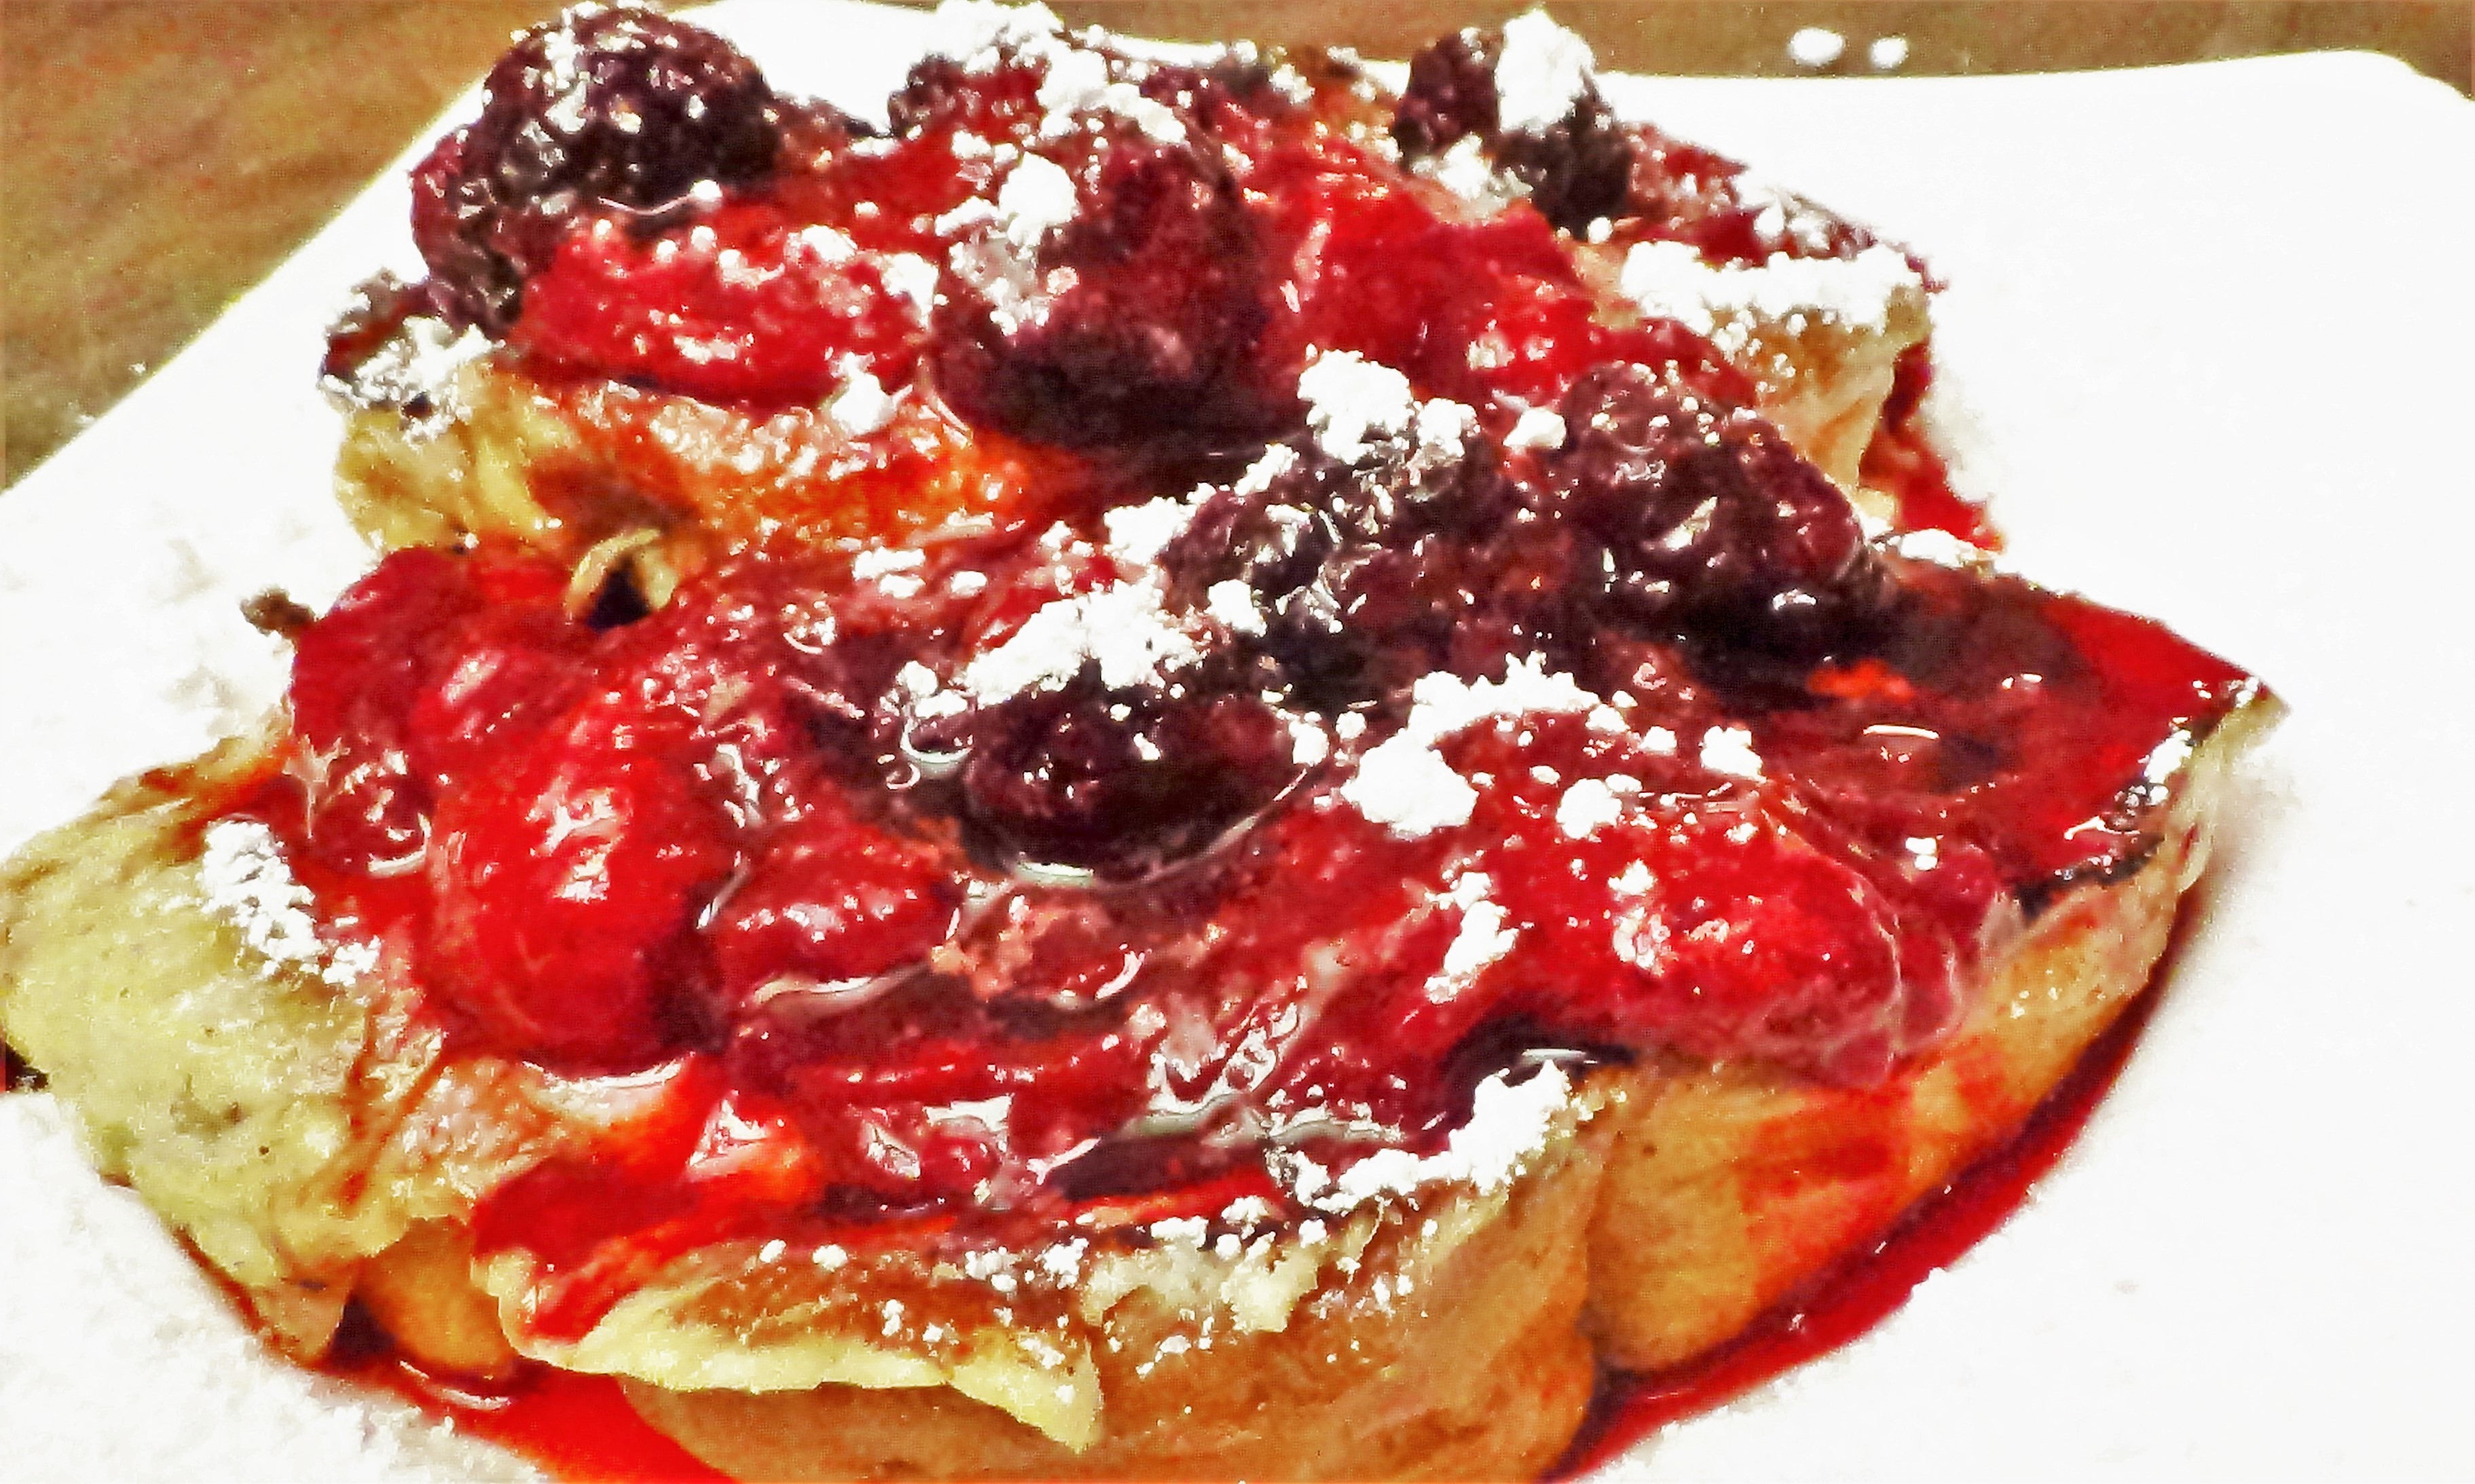 Brioche French Toast with Berry Compote